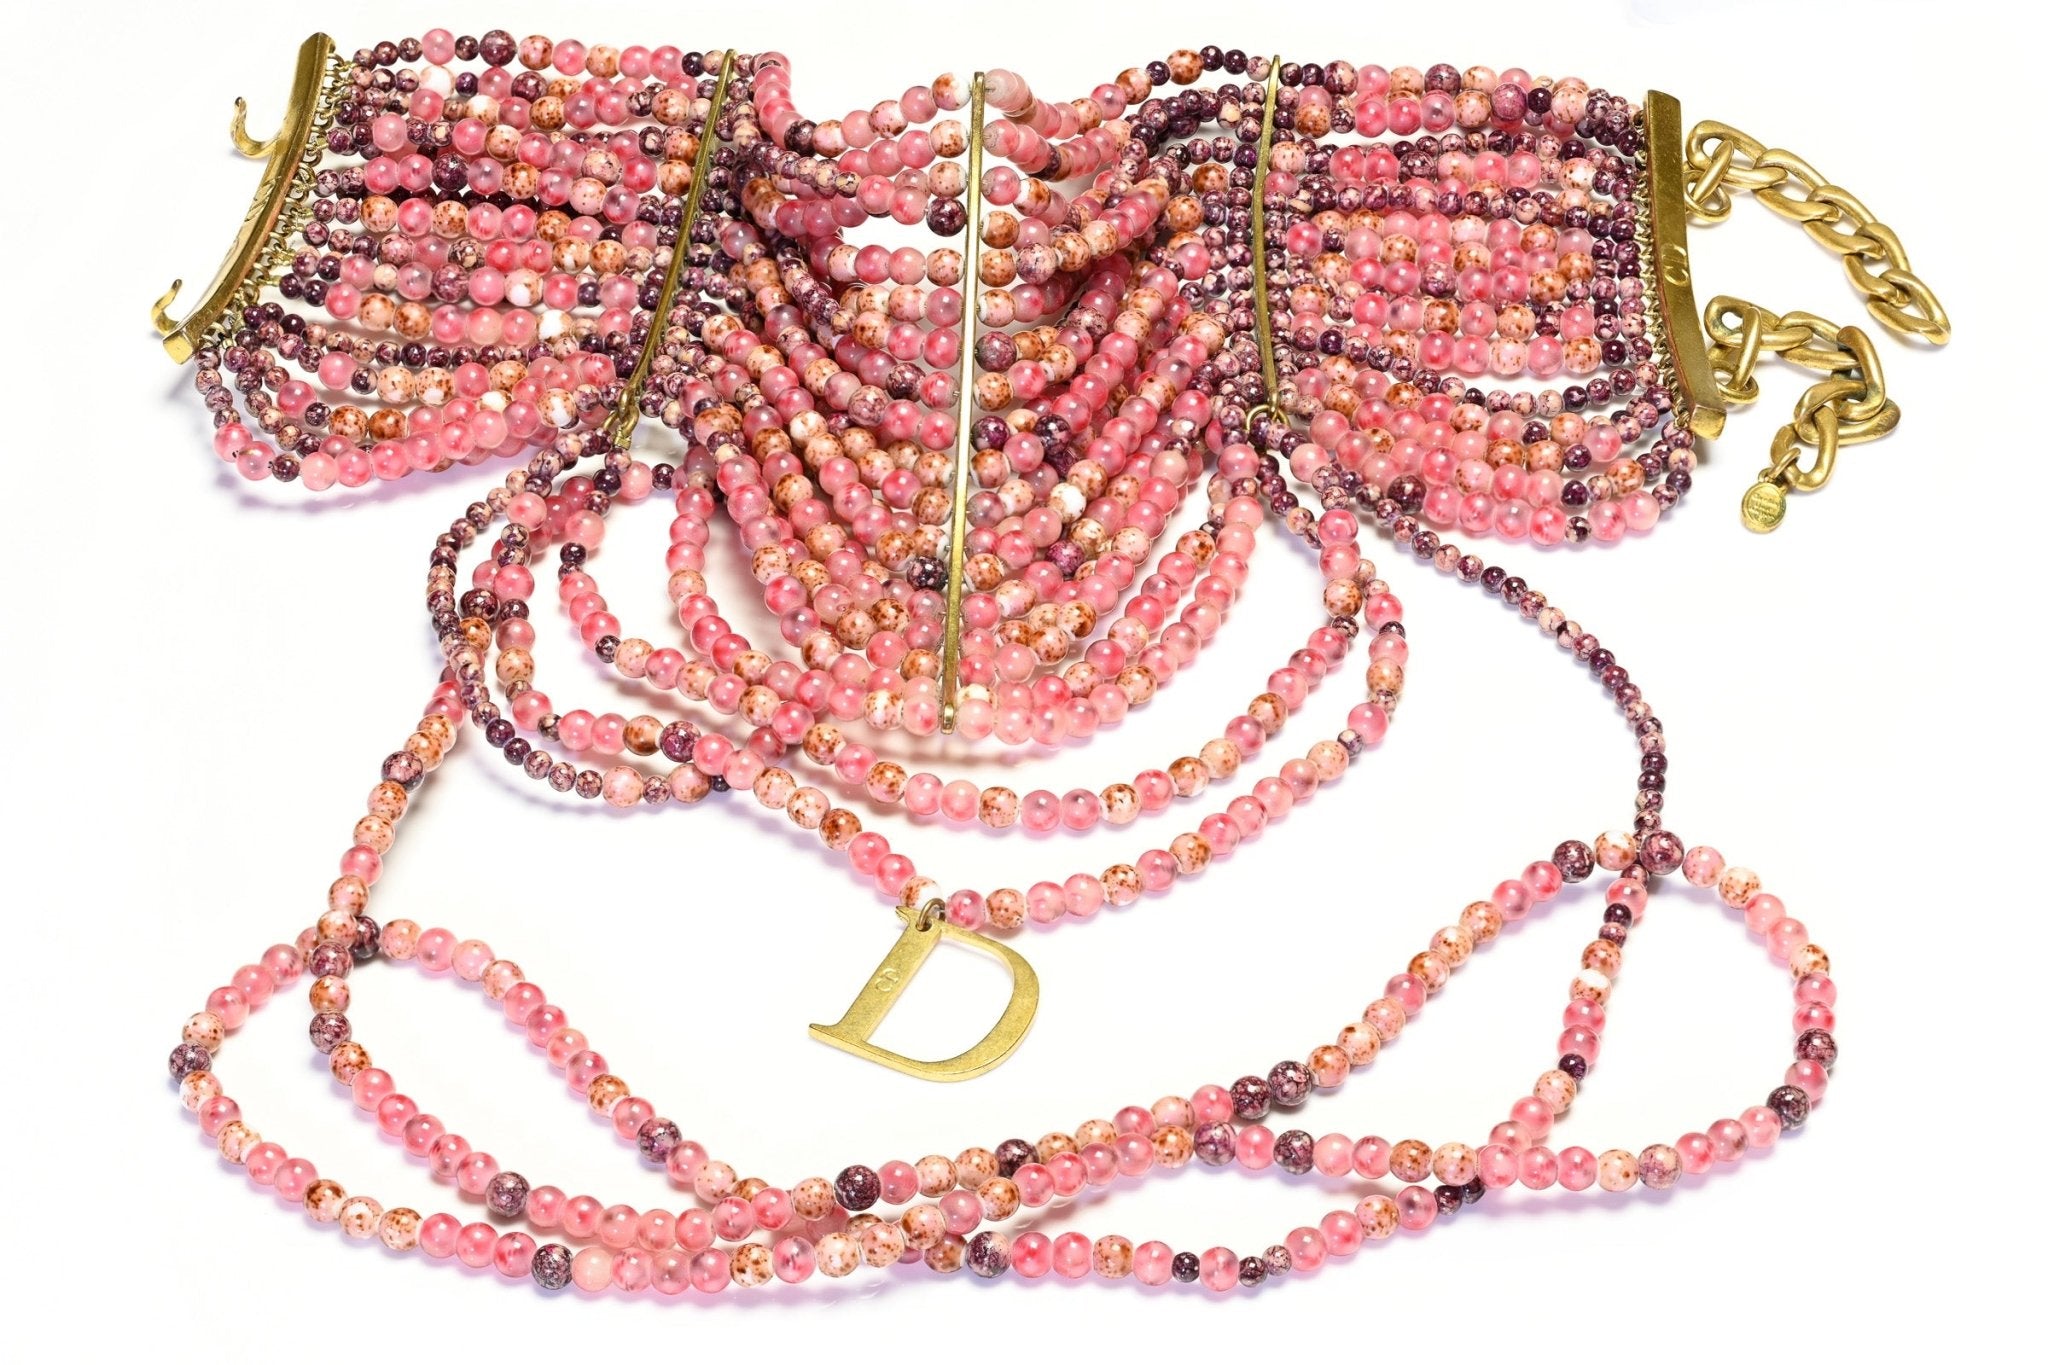 Christian Dior Couture 1998 Galliano Pink Glass Beads Masai Choker Necklace - DSF Antique Jewelry